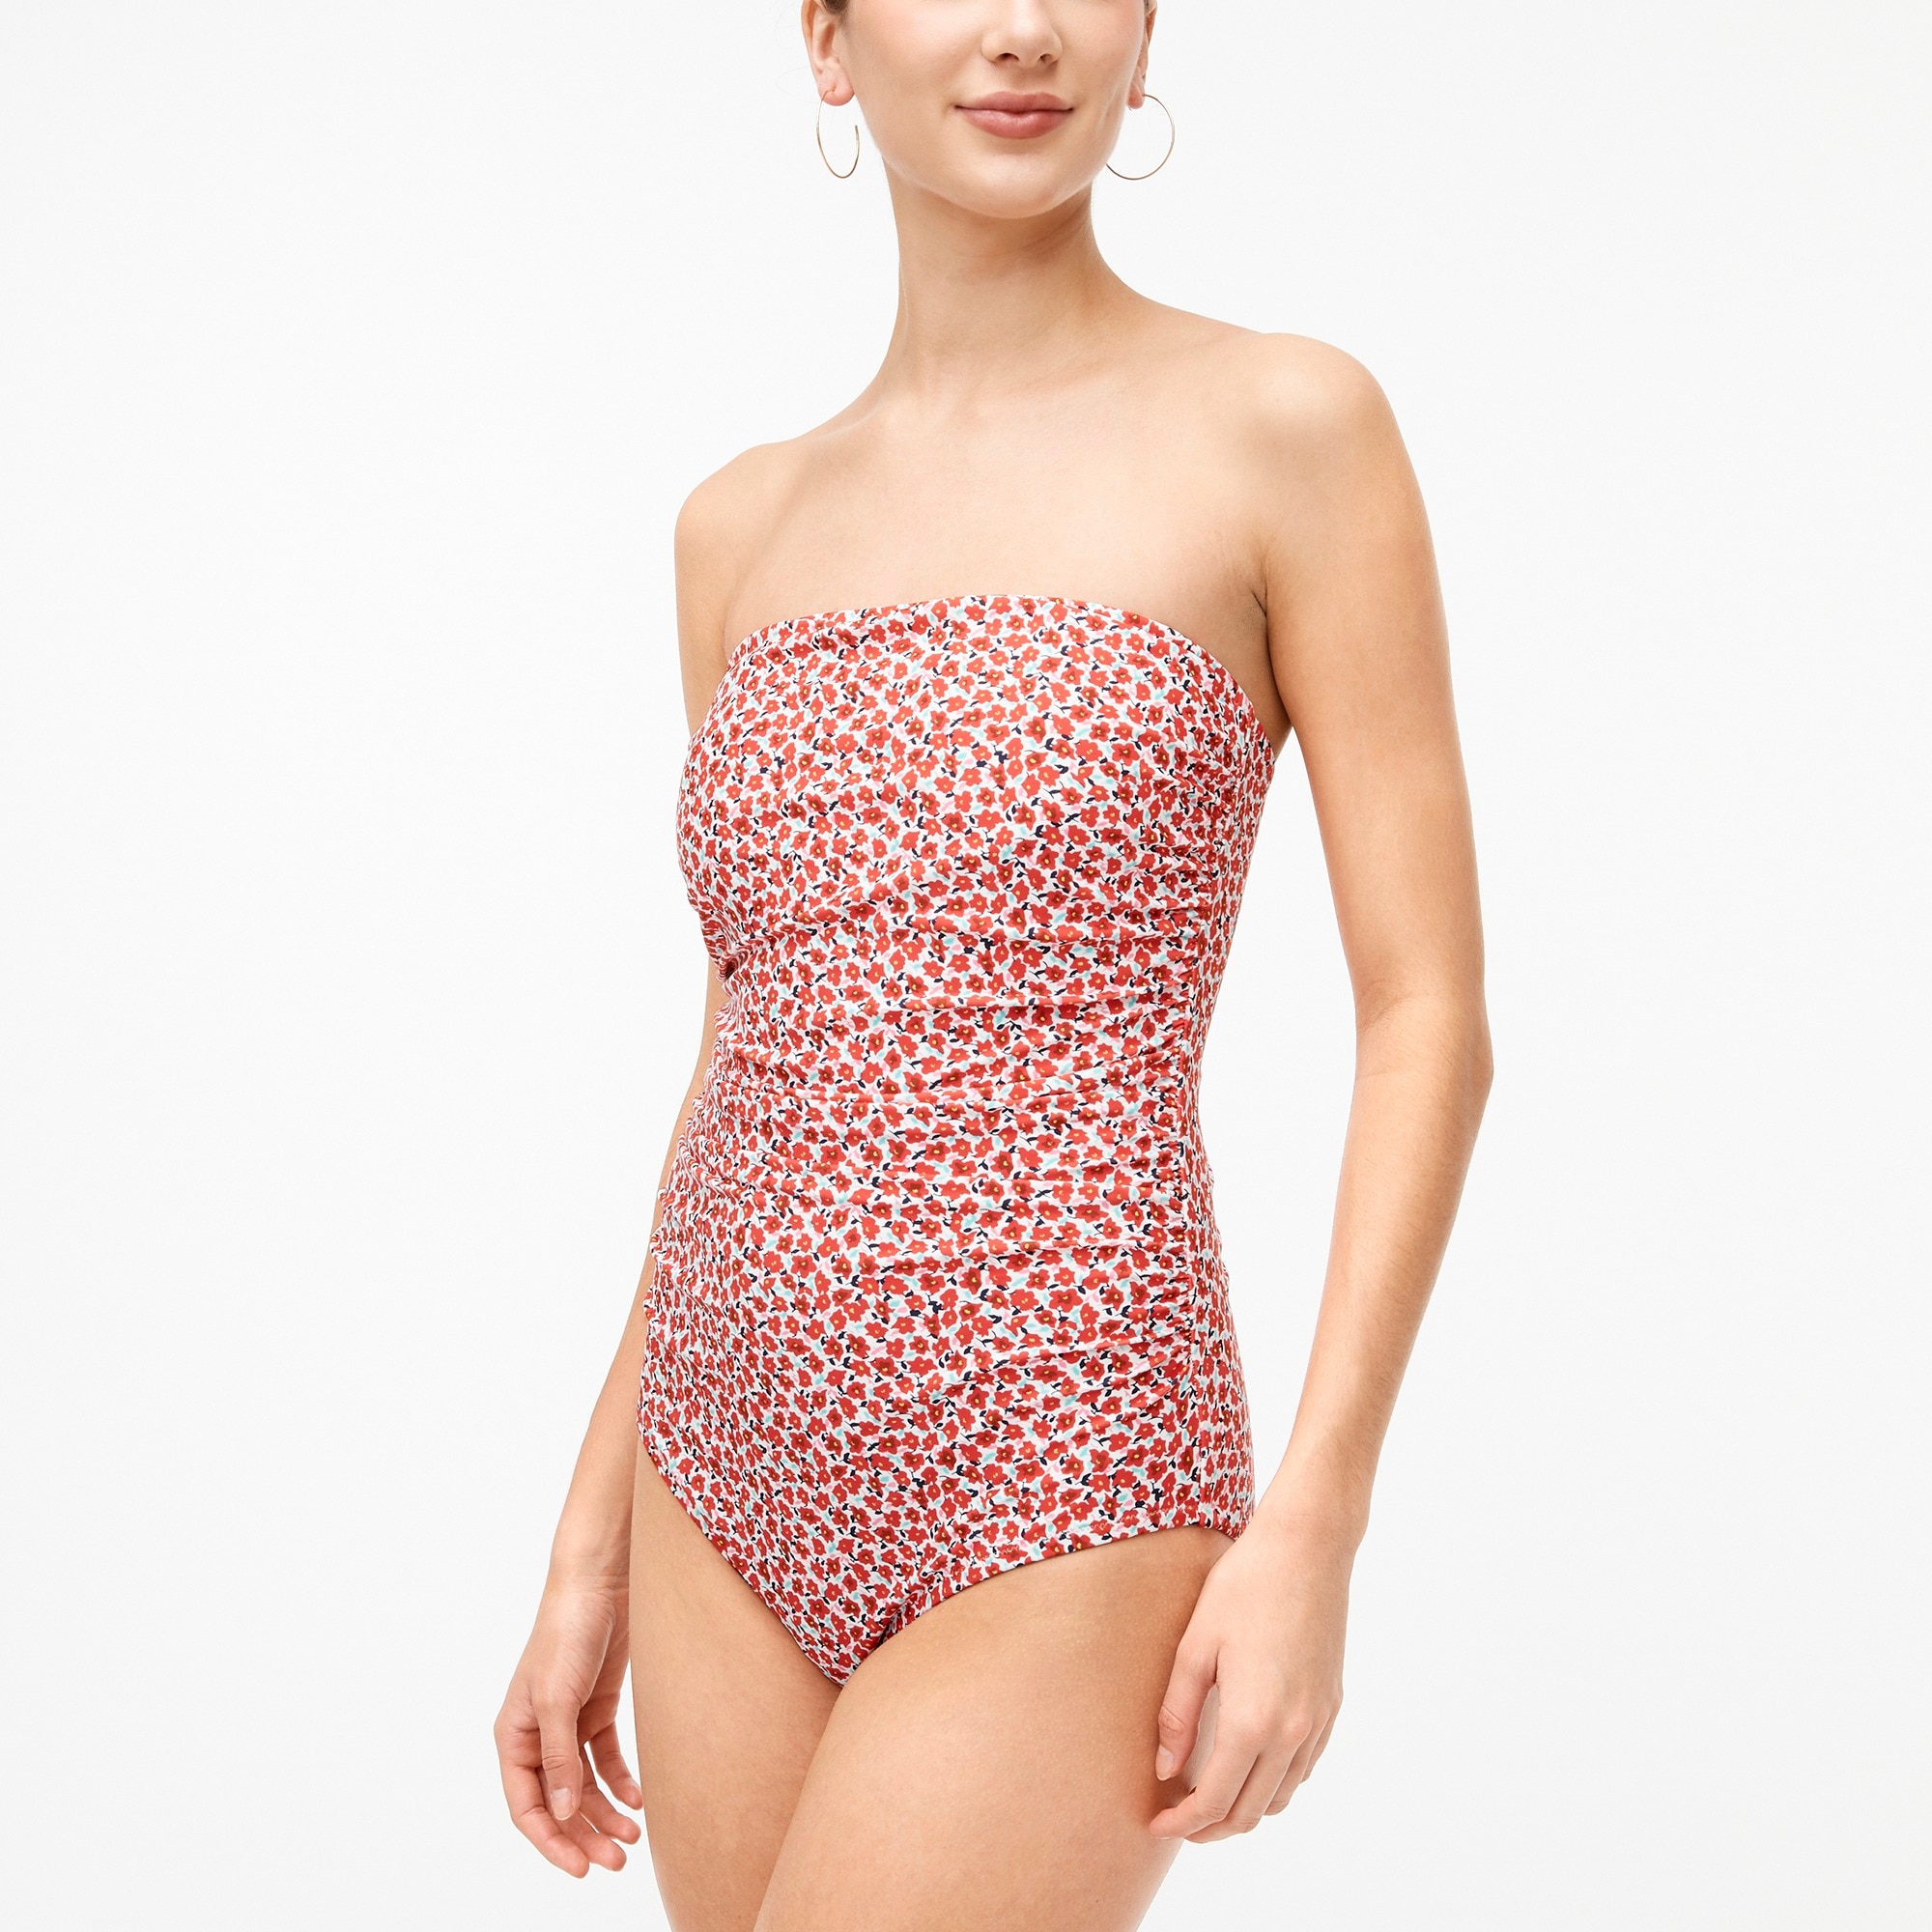 Floral Strapless One Piece Swimsuit From J Crew Factory Accuweather Shop